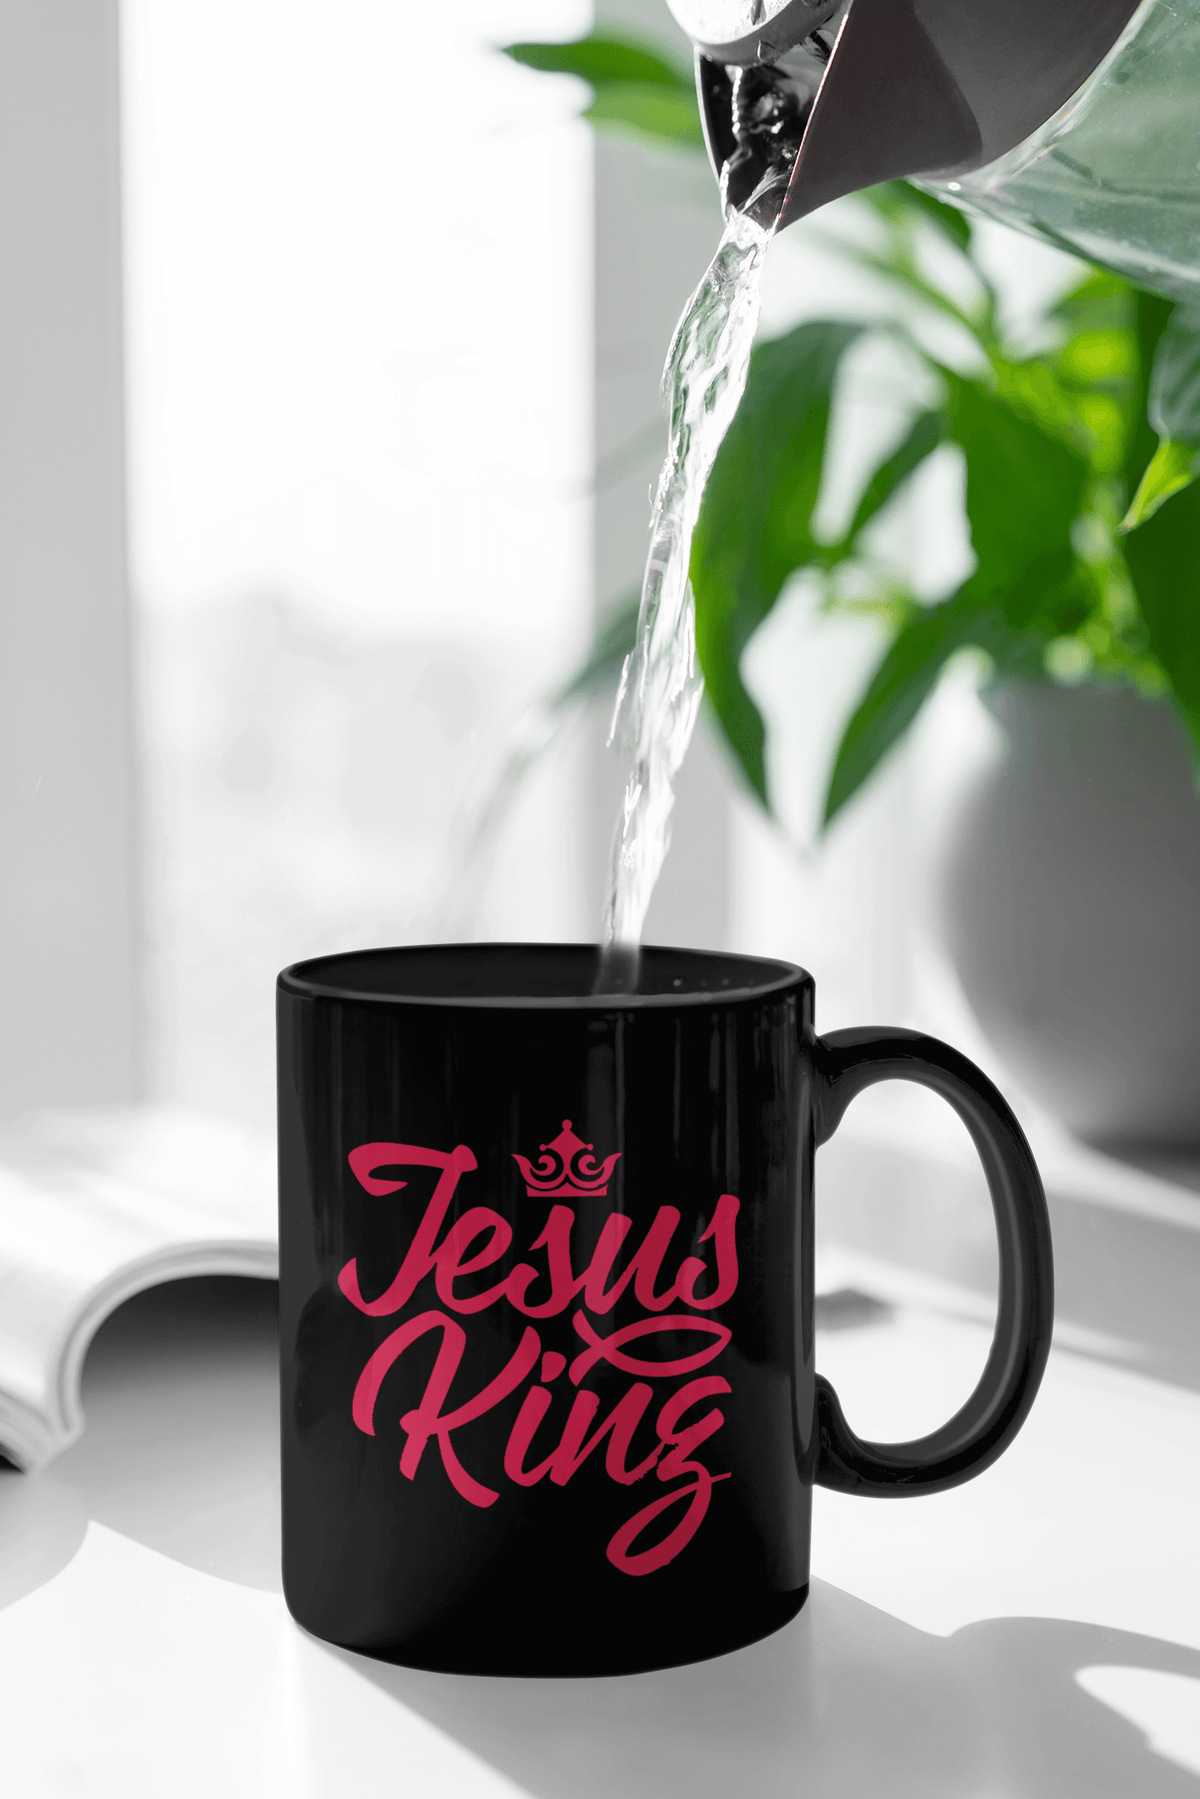 Designs by MyUtopia Shout Out:Jesus King Ceramic Coffee Mug - Black,11 oz / Black,Ceramic Coffee Mug